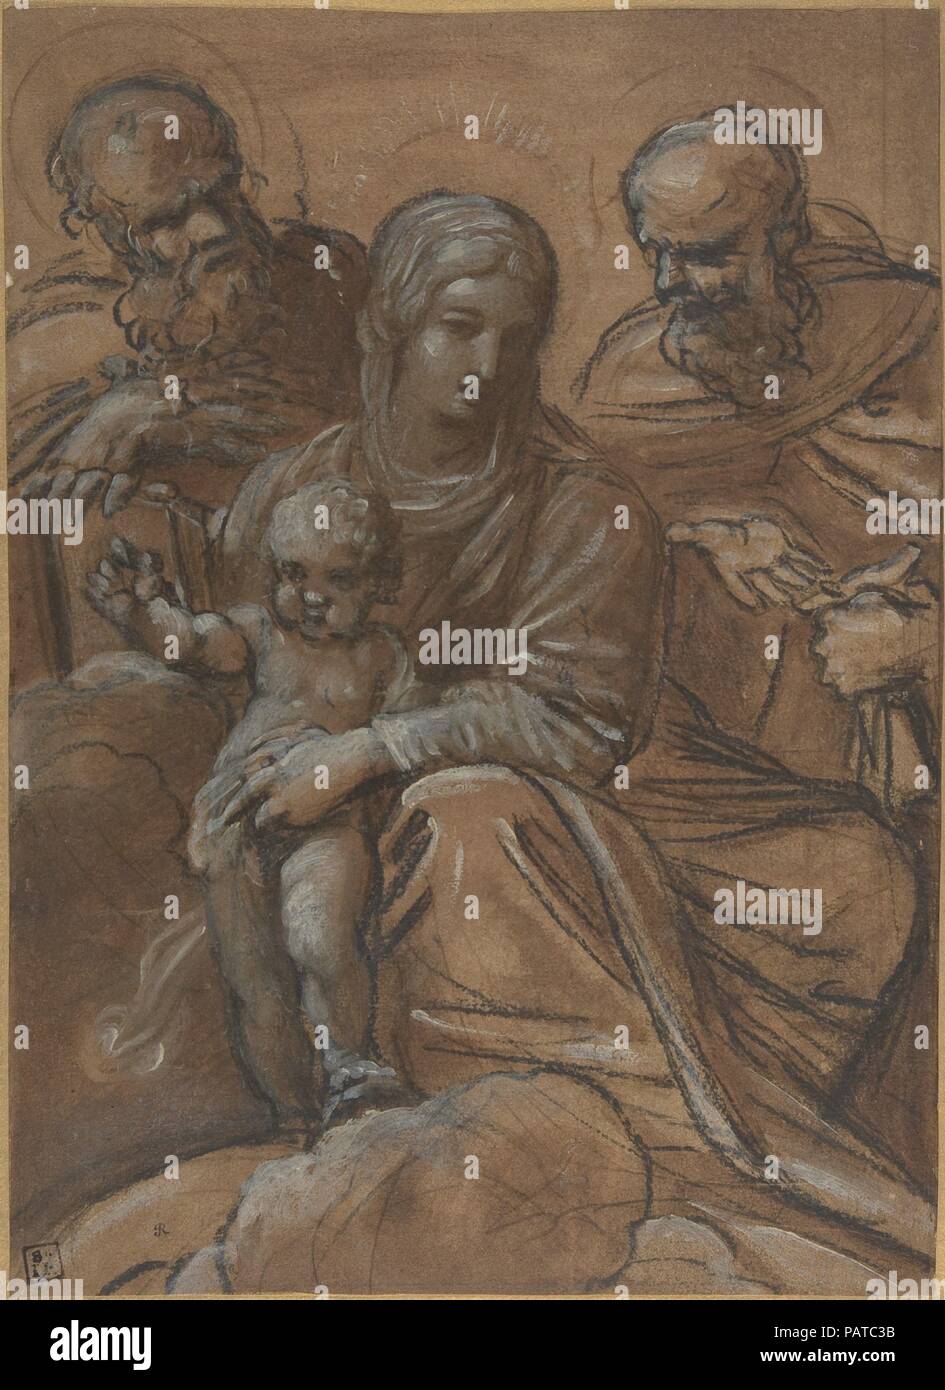 The Virgin and Child with Two Male Saints. Artist: Giacomo Cavedone (Italian, Sassuolo 1577-1660 Bologna). Dimensions: 12 1/16 x 8 3/4in. (30.7 x 22.3cm). Date: 1577-1660. Museum: Metropolitan Museum of Art, New York, USA. Stock Photo